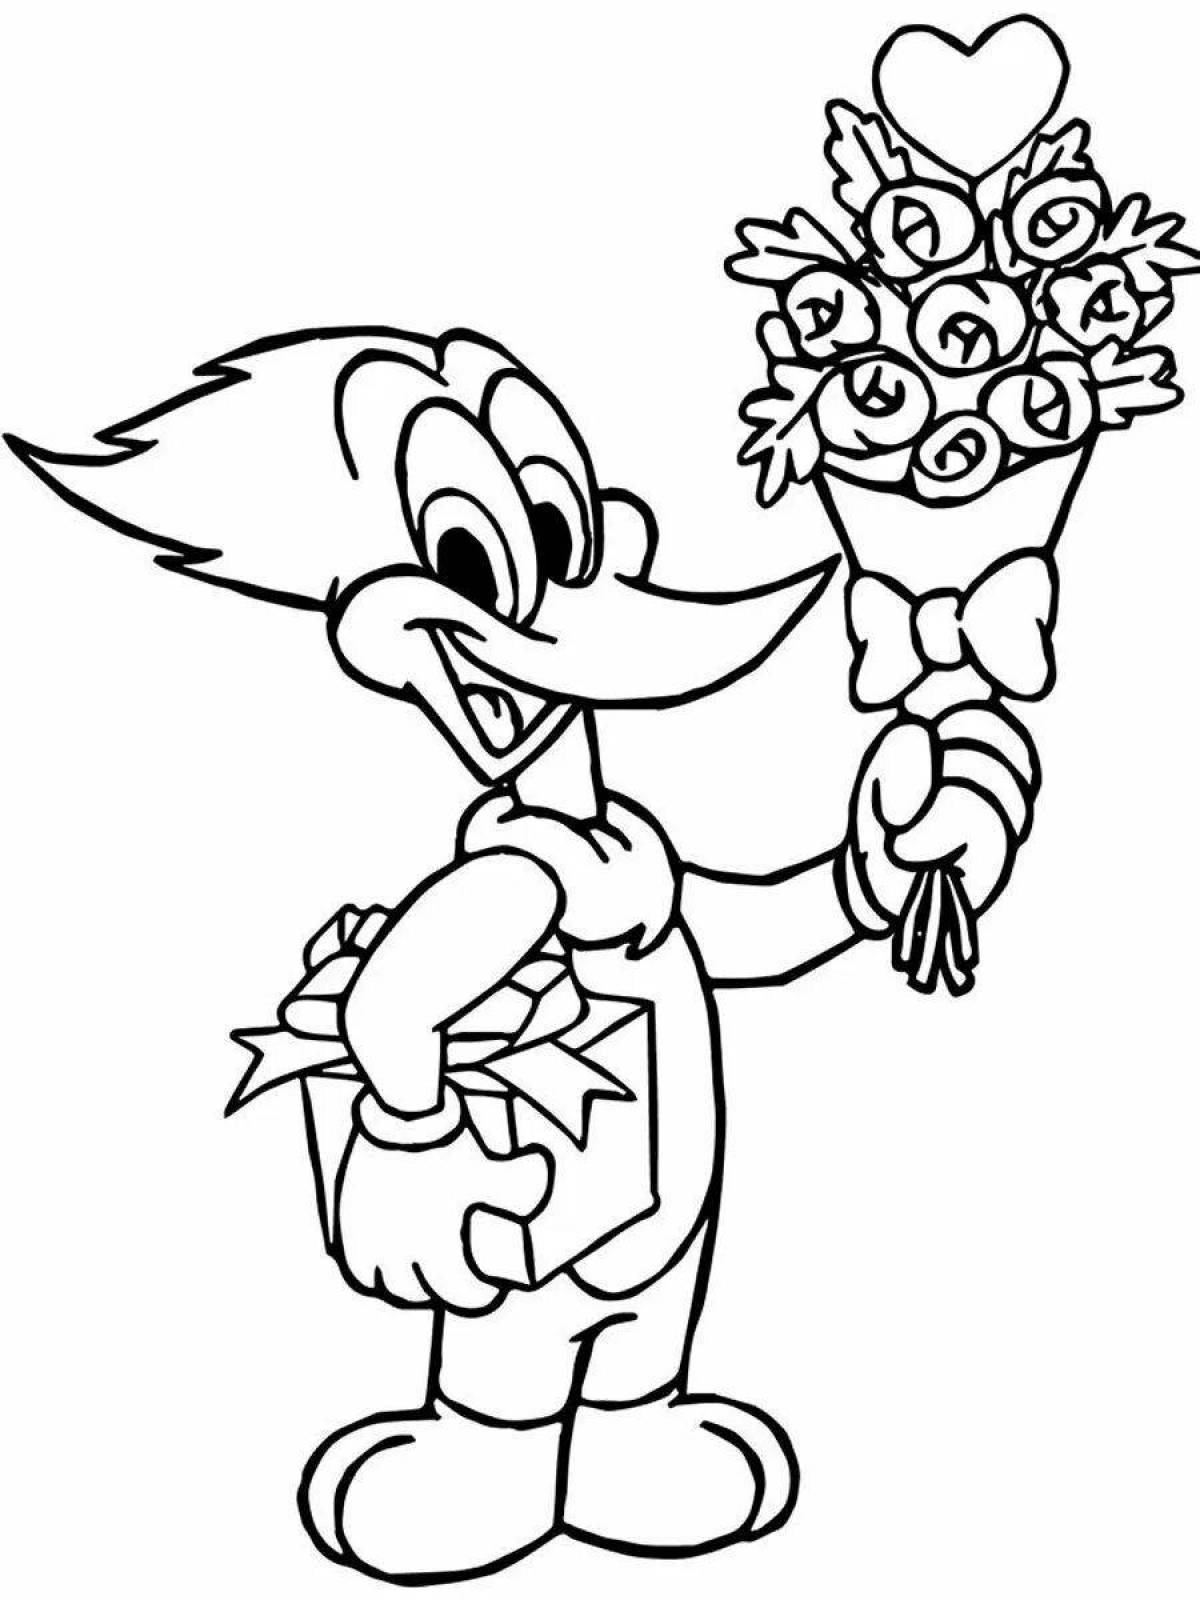 Coloring book shiny woody woodpecker